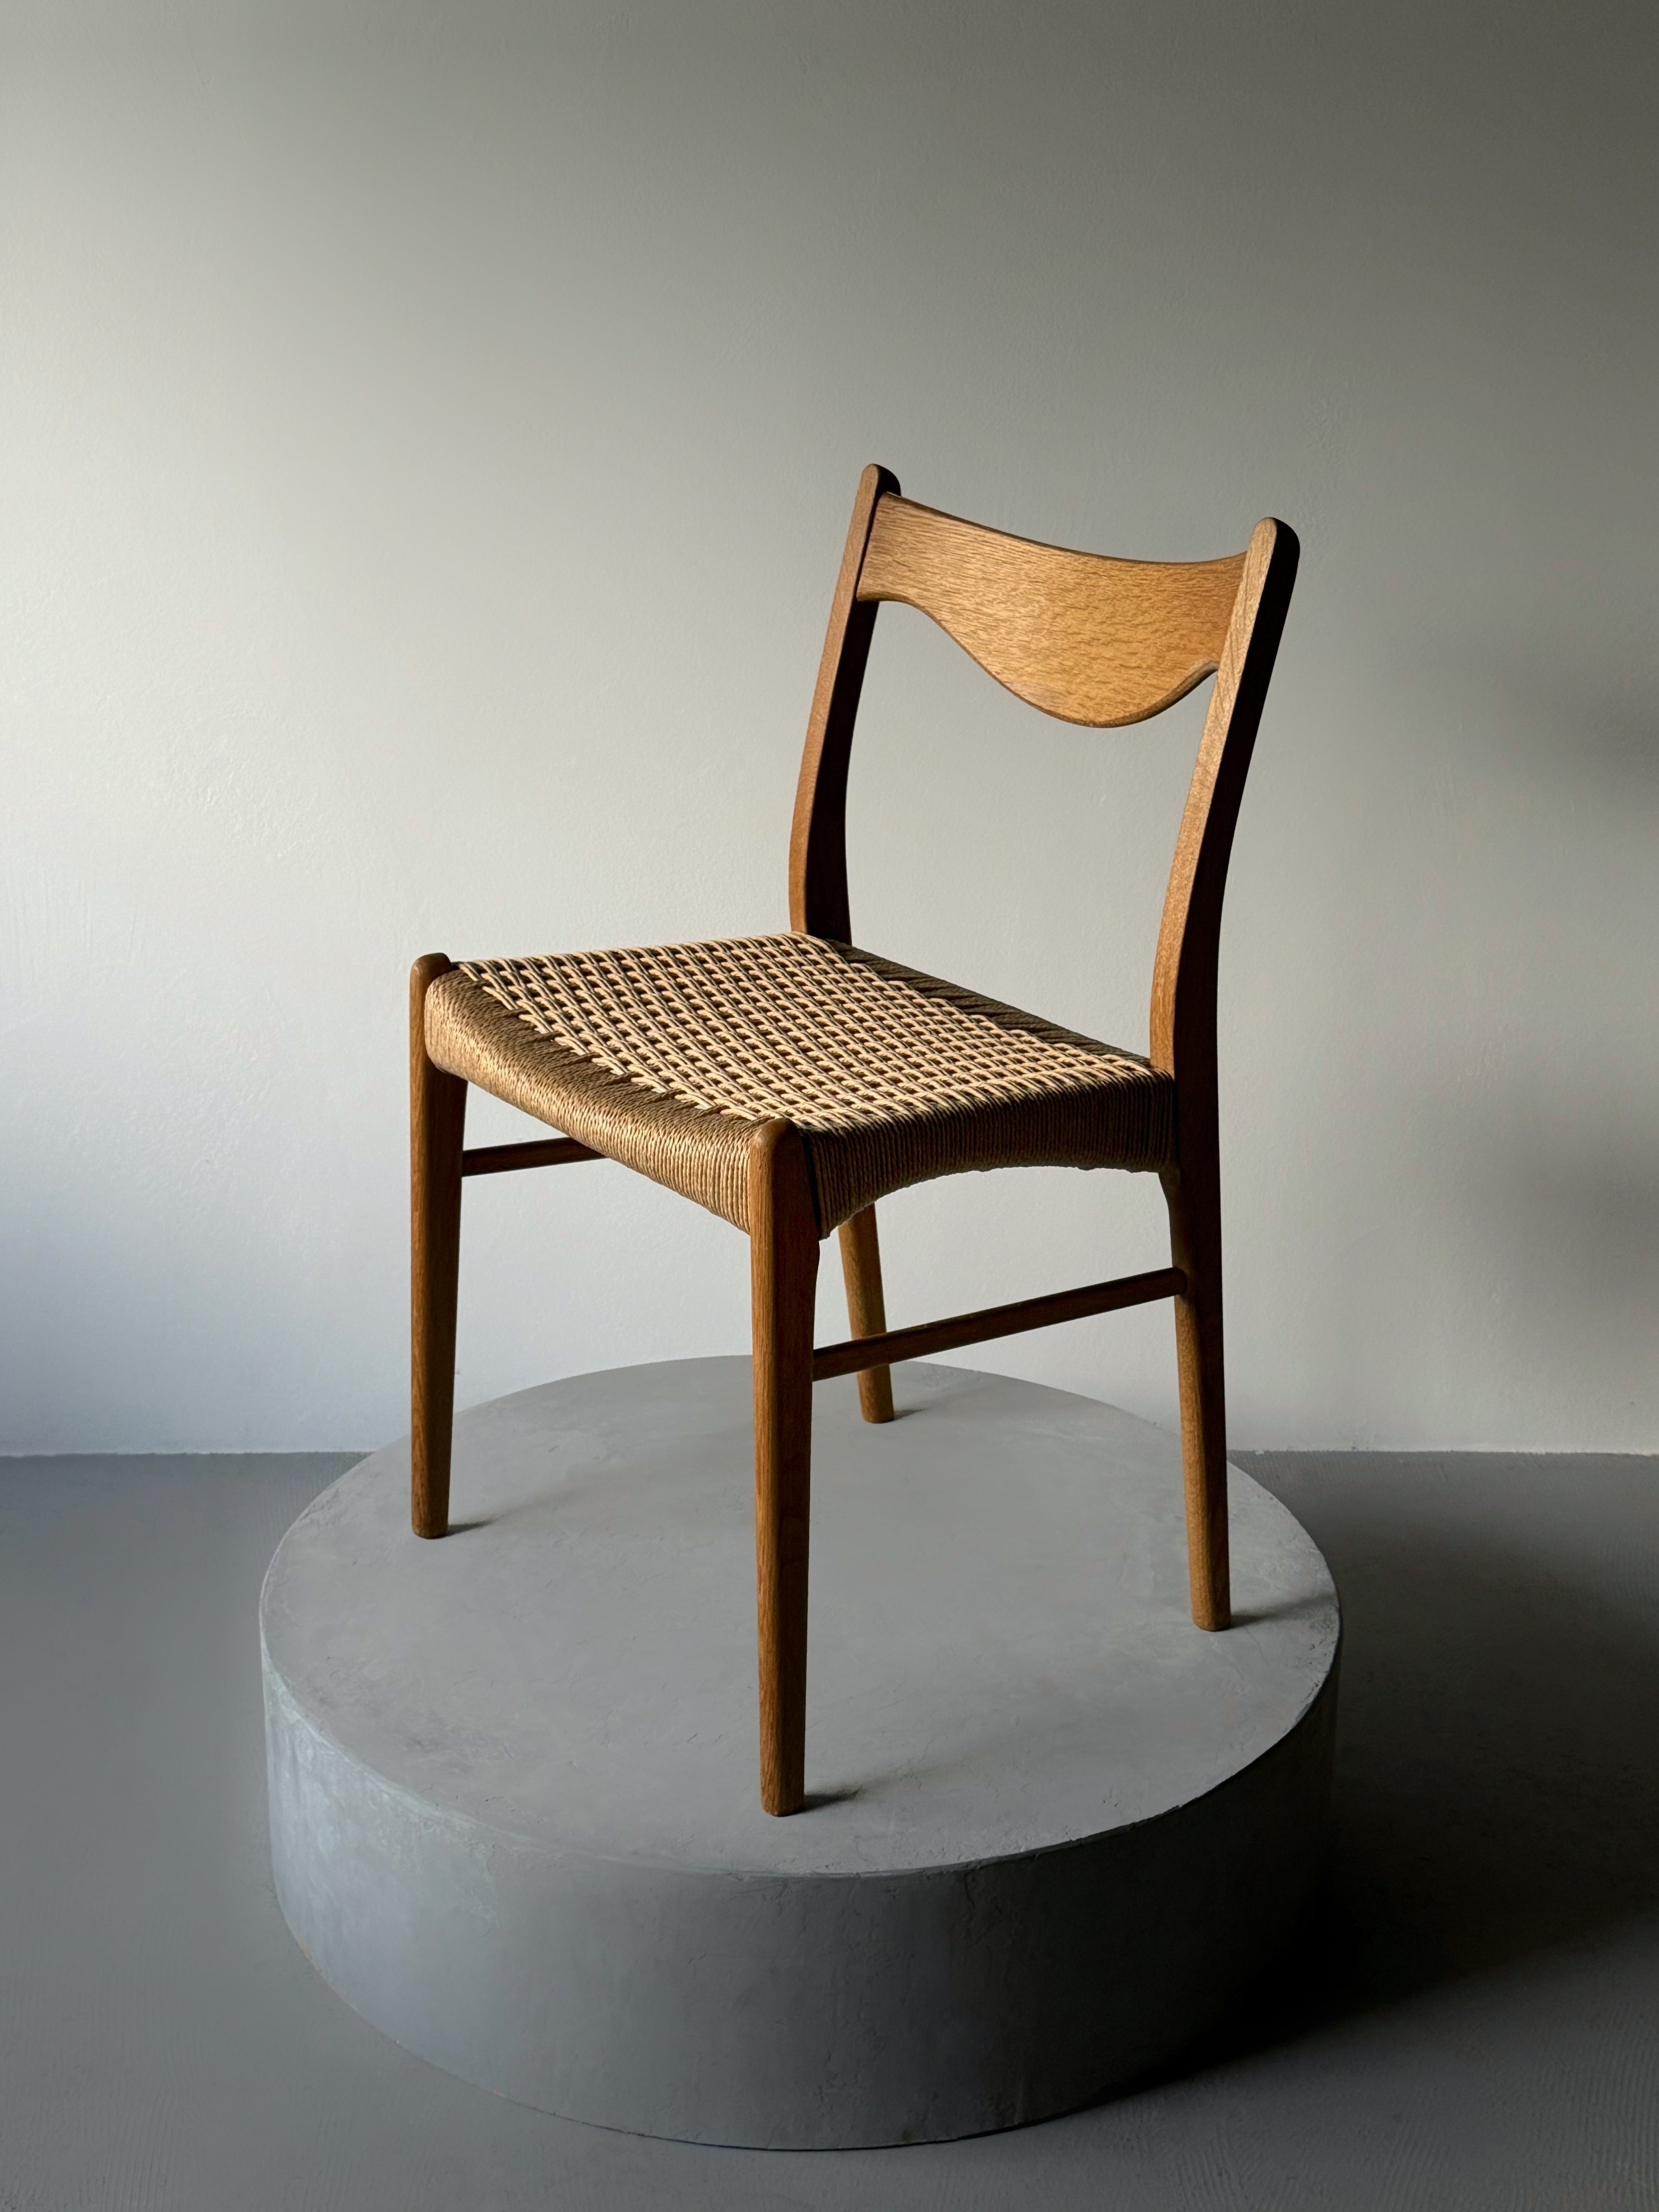 Oak dining chair with papercord seat by Arne Wahl Iversen